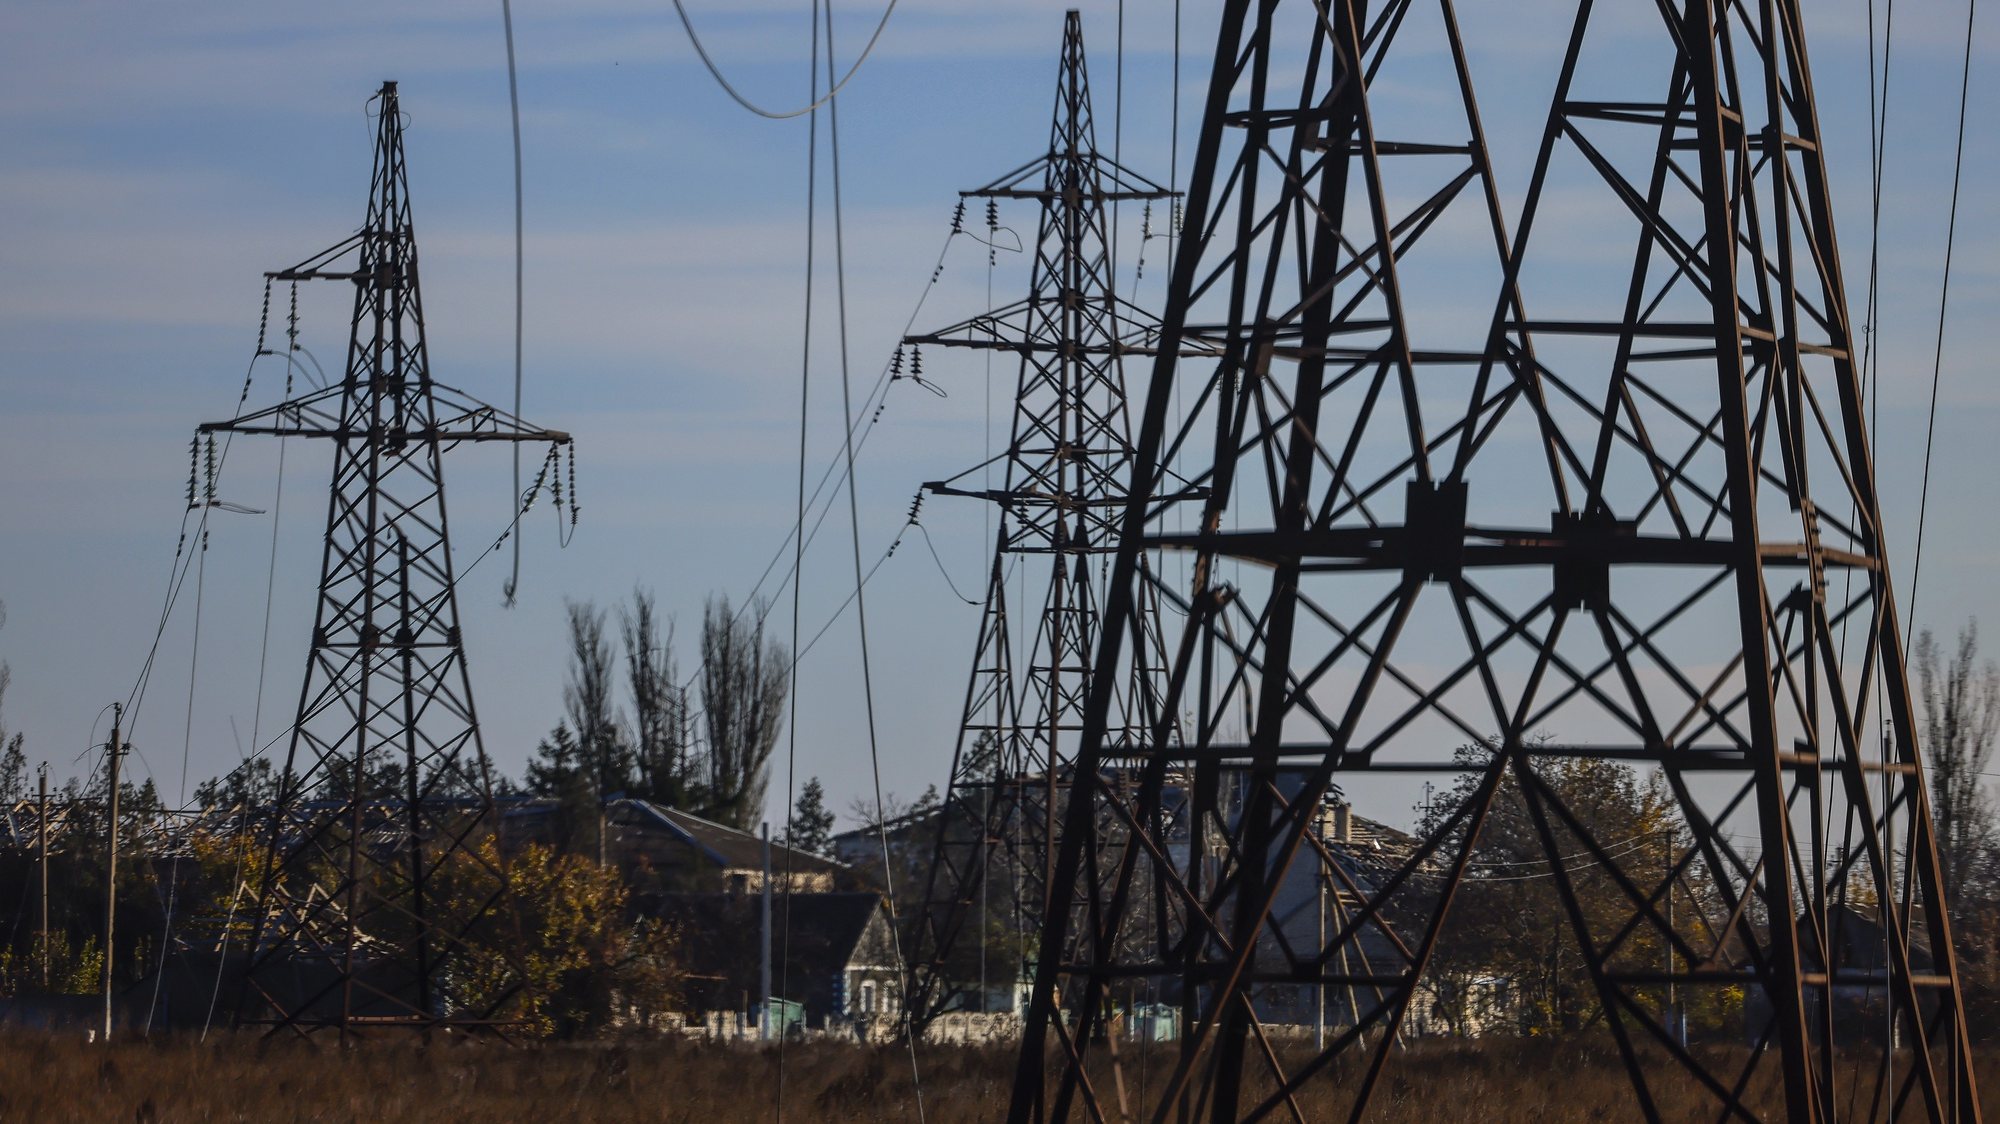 epa10292411 Damaged power lines at the frontline at the northern Kherson region, Ukraine, 07 November 2022. Russian troops on 24 February entered Ukrainian territory, starting a conflict that has provoked destruction and a humanitarian crisis.  EPA/HANNIBAL HANSCHKE